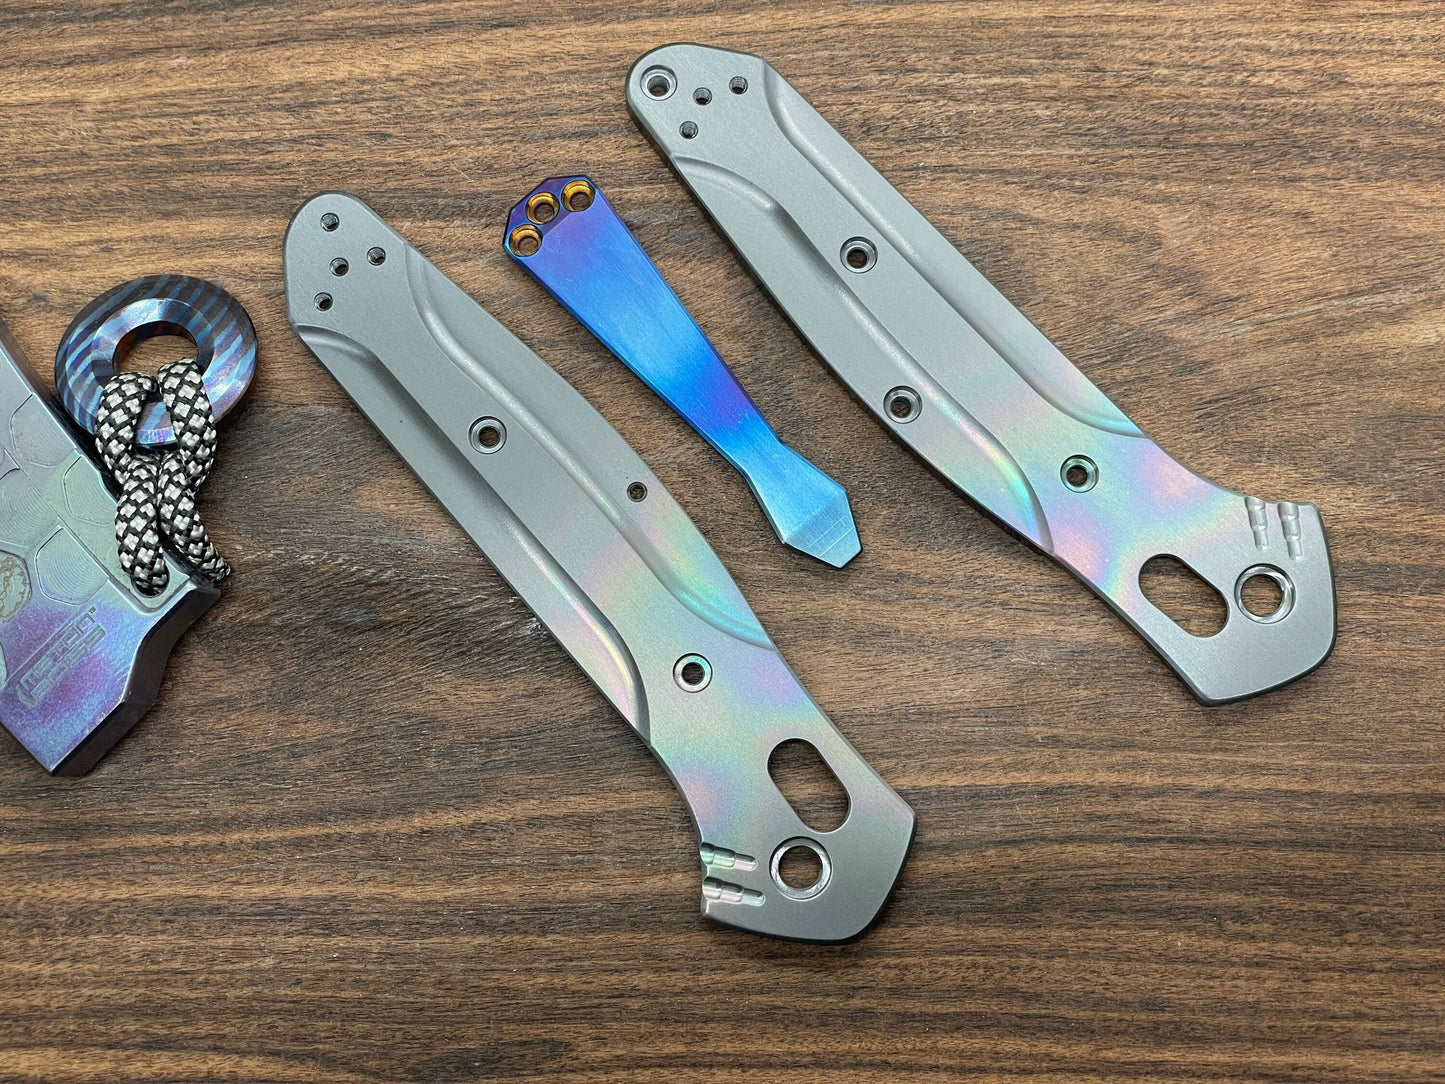 Flamed Dmd Titanium CLIP for most Benchmade models